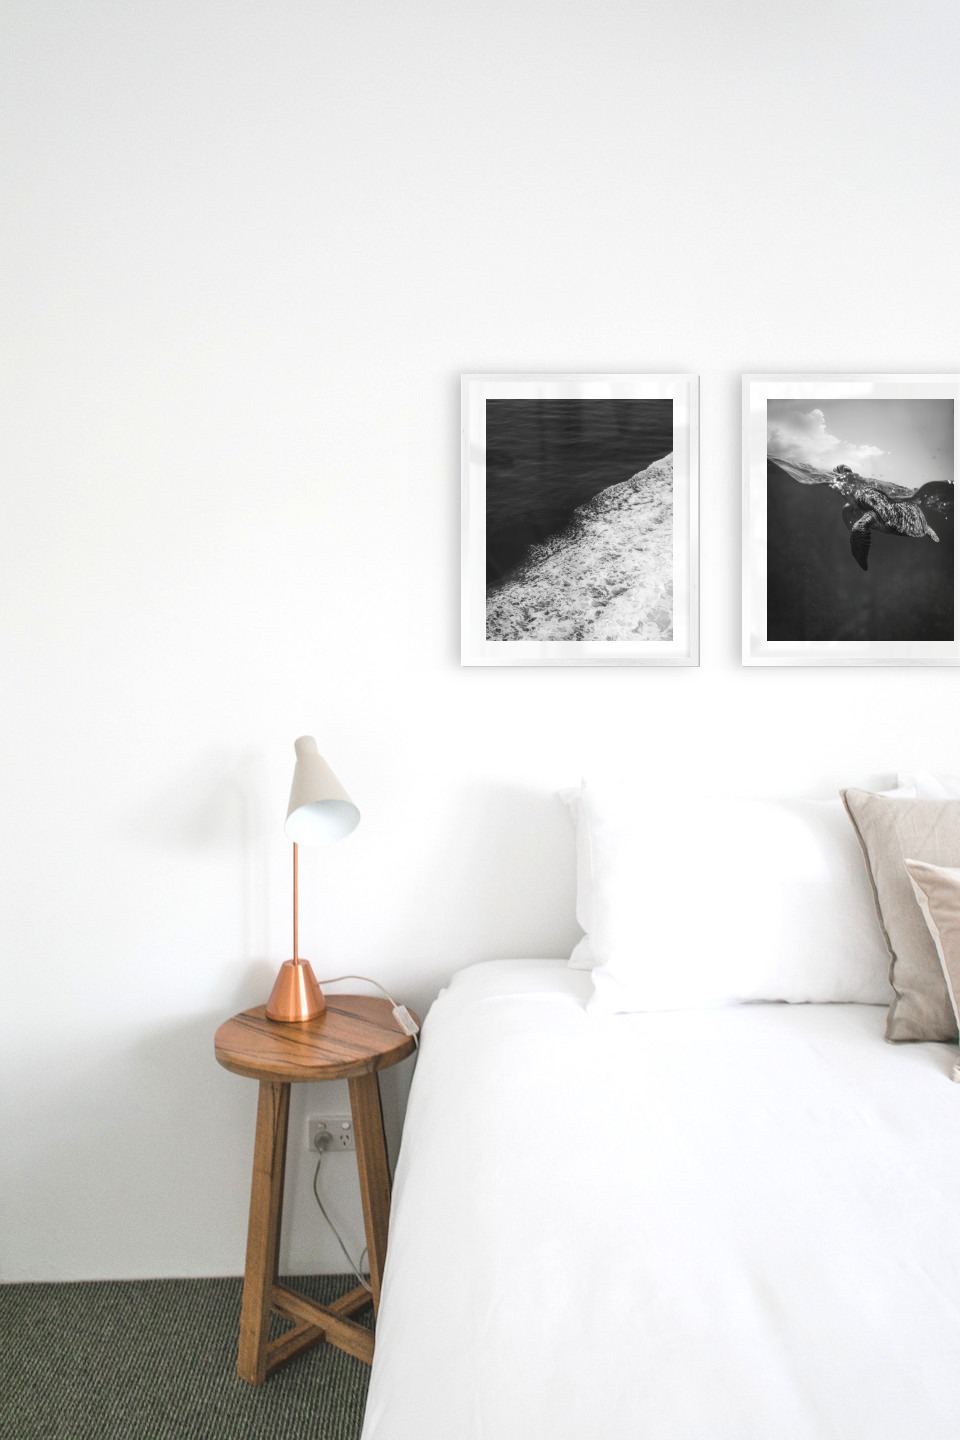 Gallery wall with picture frames in silver in sizes 40x50 with prints "Swell from waves" and "Turtle"